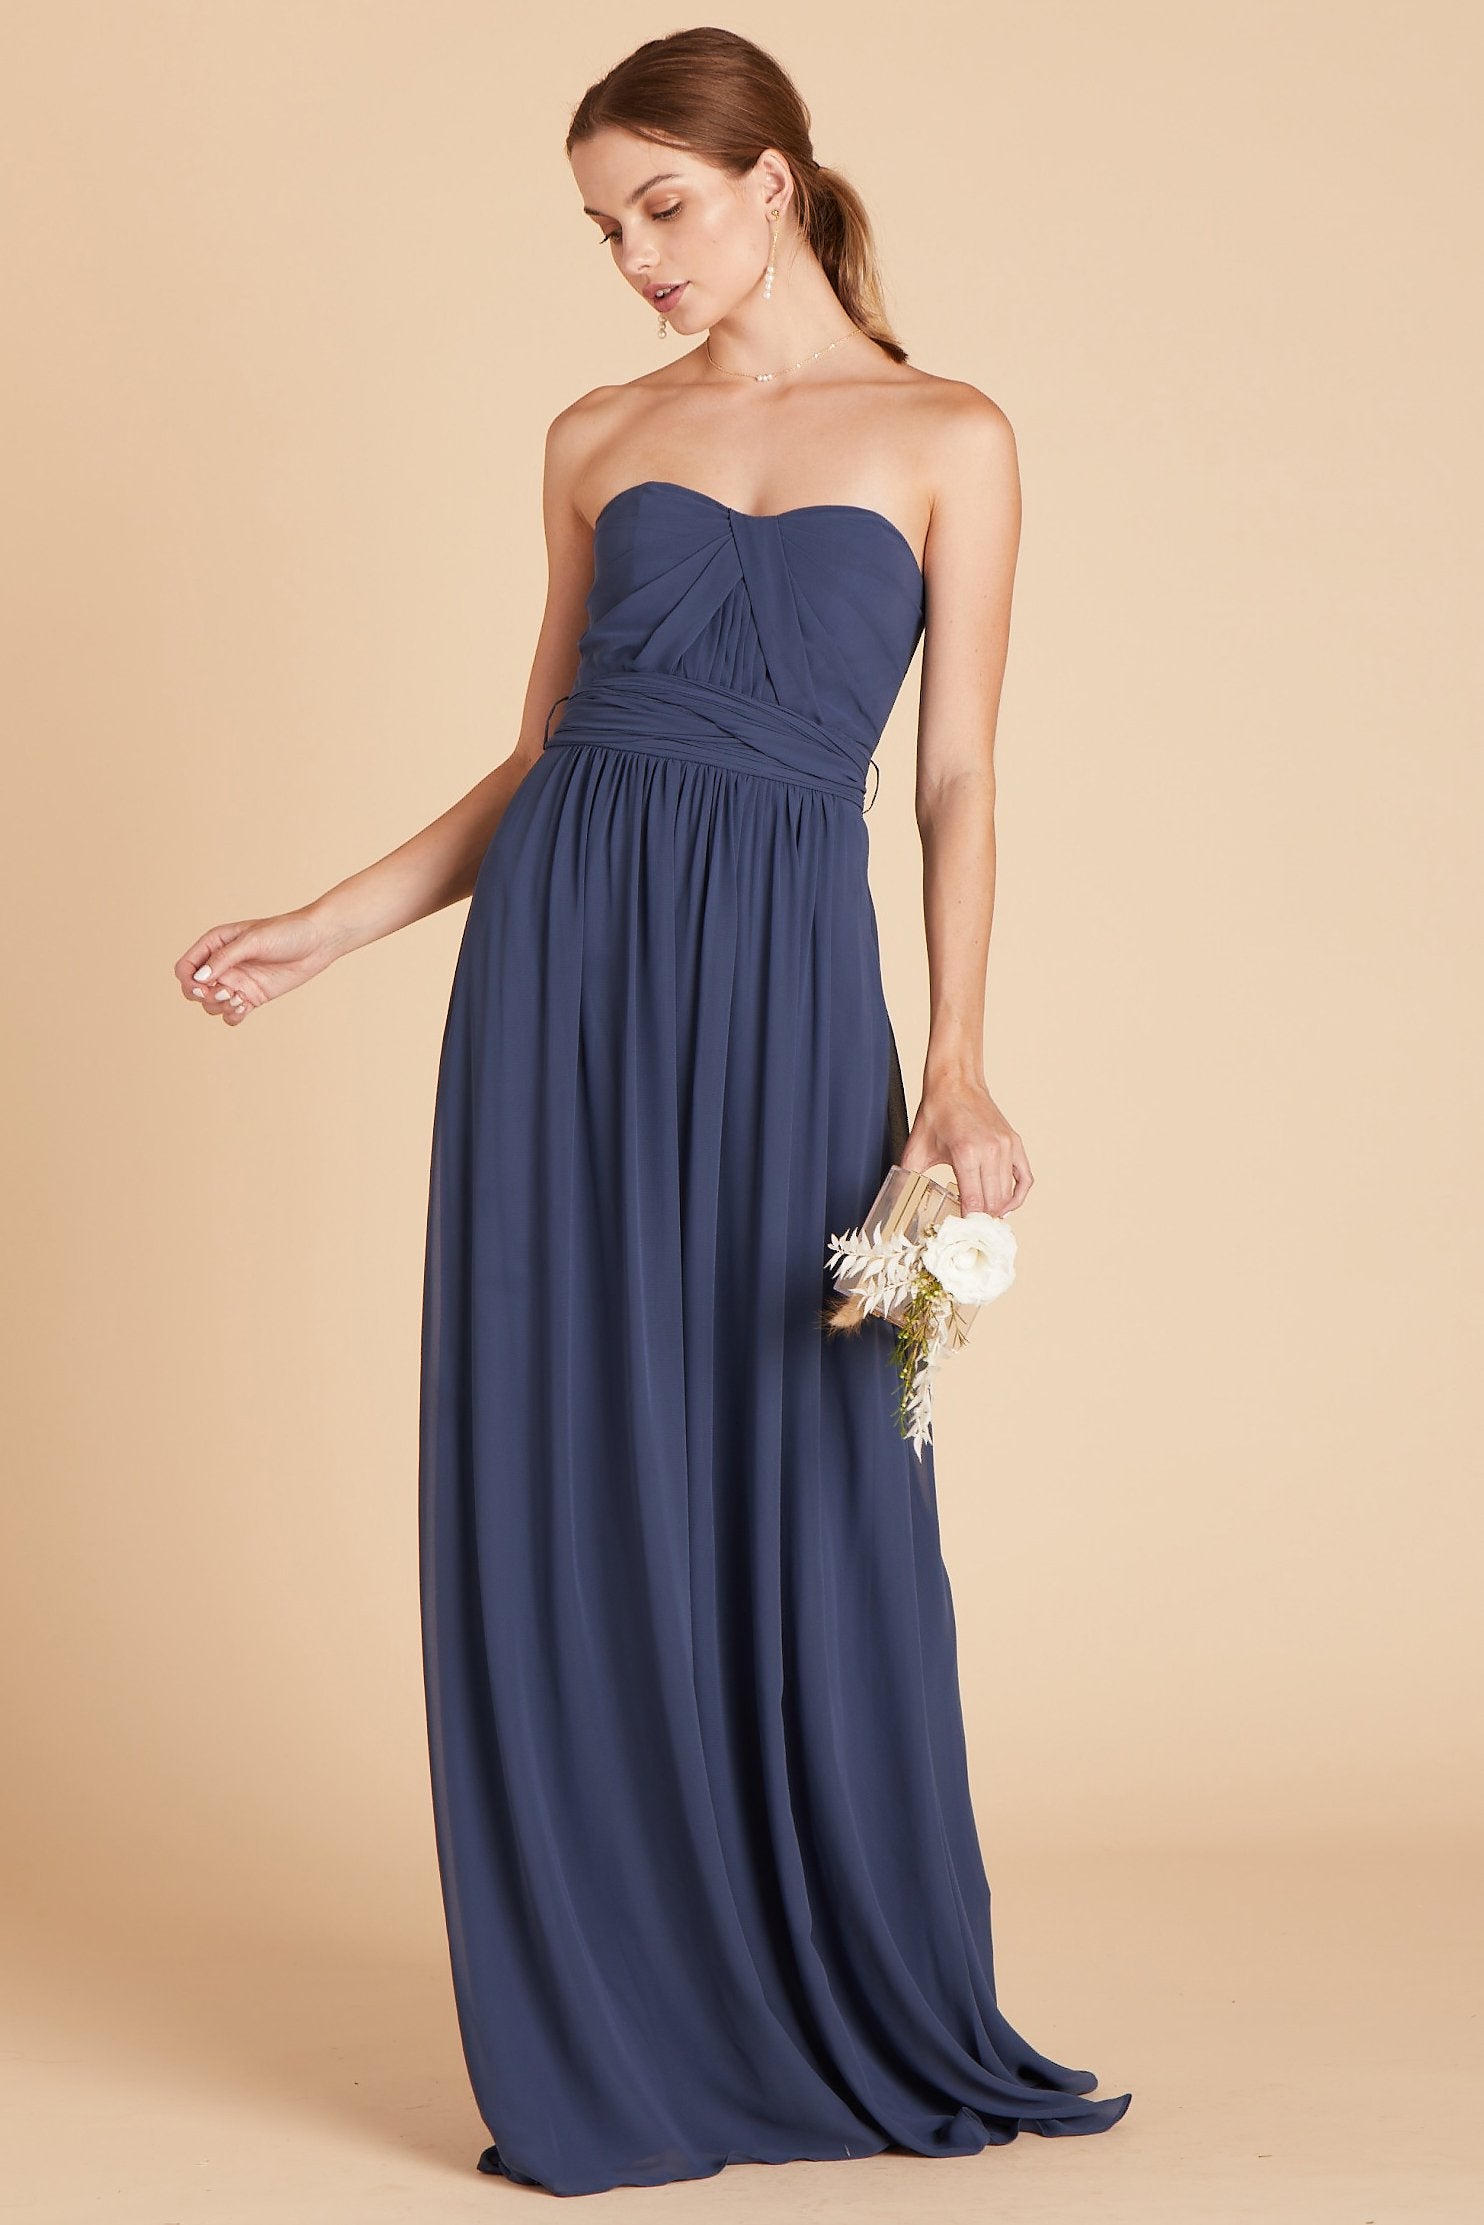 Grace convertible bridesmaid dress in slate blue chiffon by Birdy Grey, front view